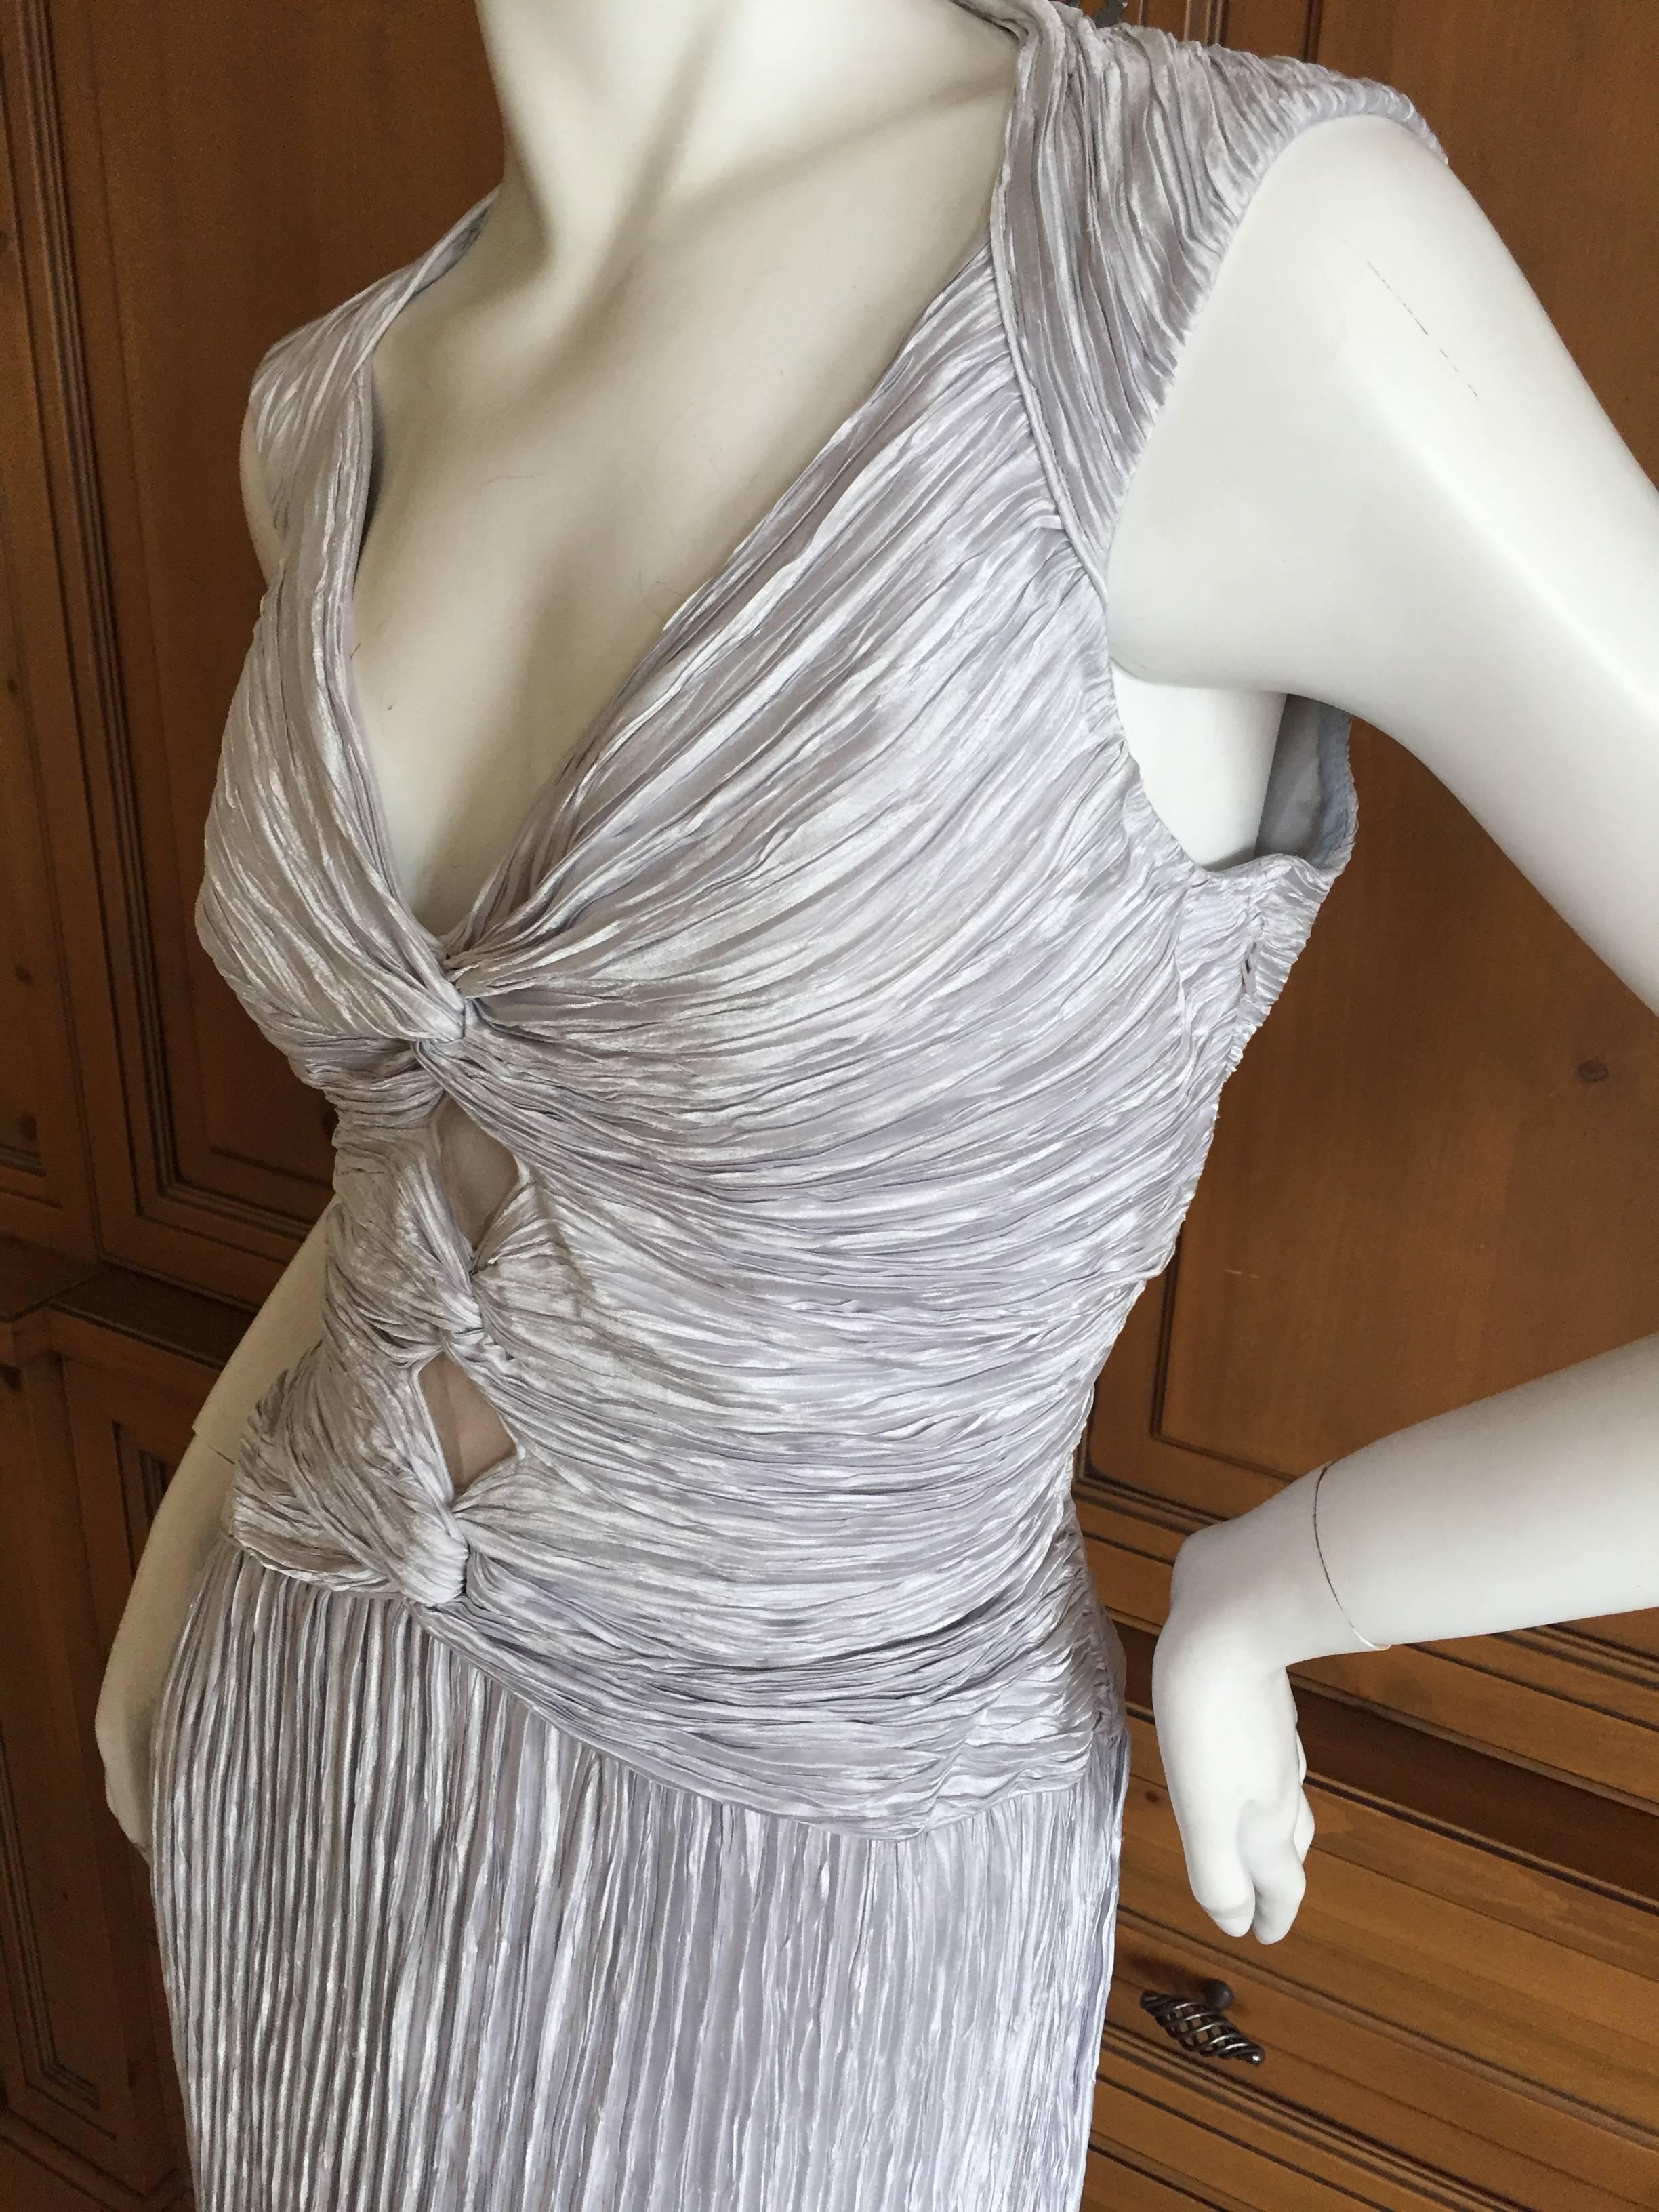 Beautiful silver pleated evening dress from Mary McFadden, circa 1970's.
Size 14 
It will fit much larger size than the measurements due to the looseness of the pleating,
Bust 40" Waist 35" Hips 55" Length 55" 
Excellent